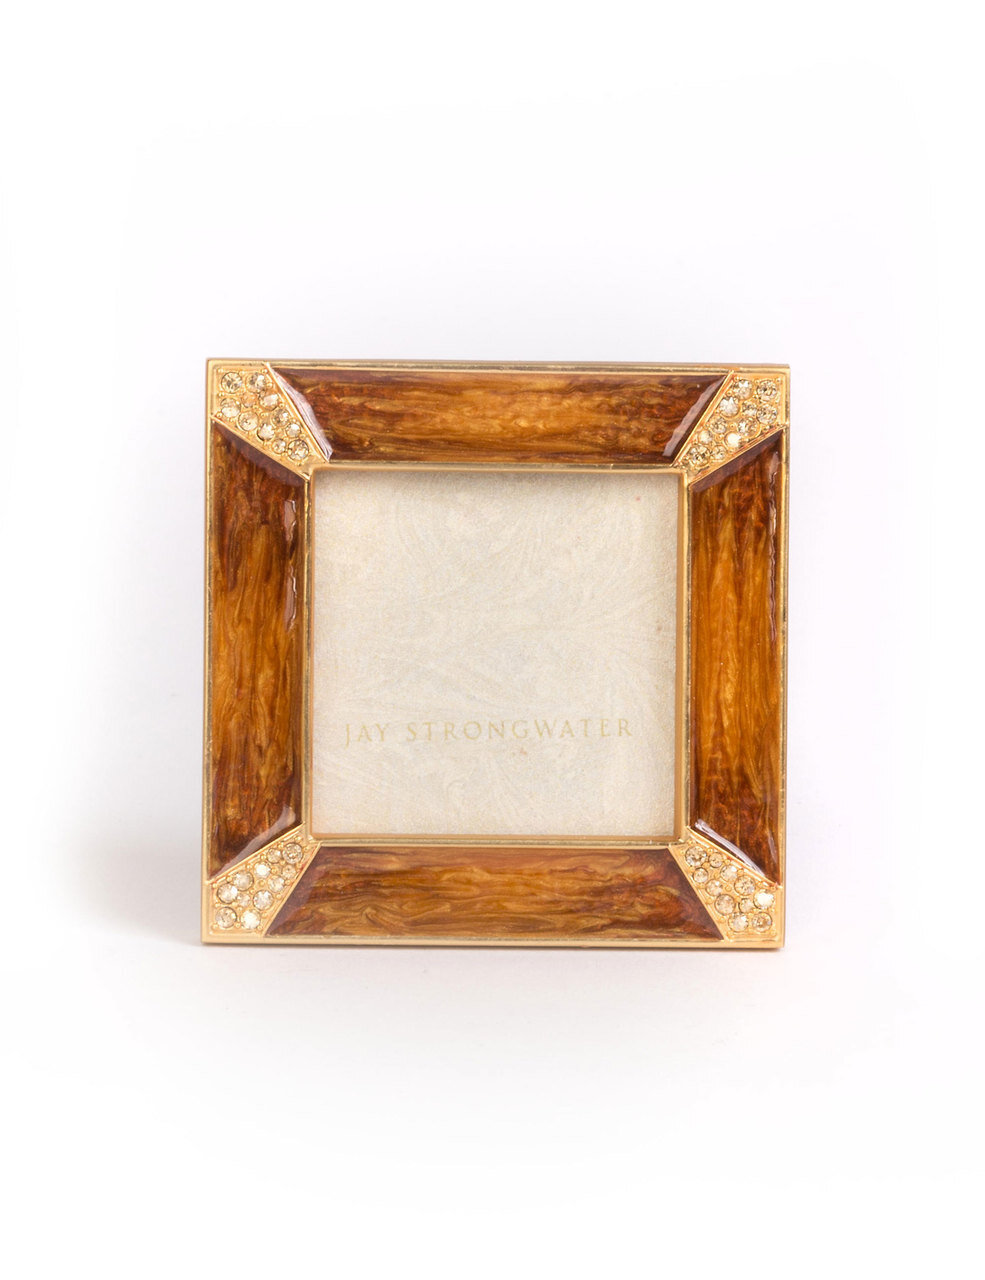 Jay Strongwater Leland Pave Corner 2 Inch Square Picture Frame Topaz SPF5130-248